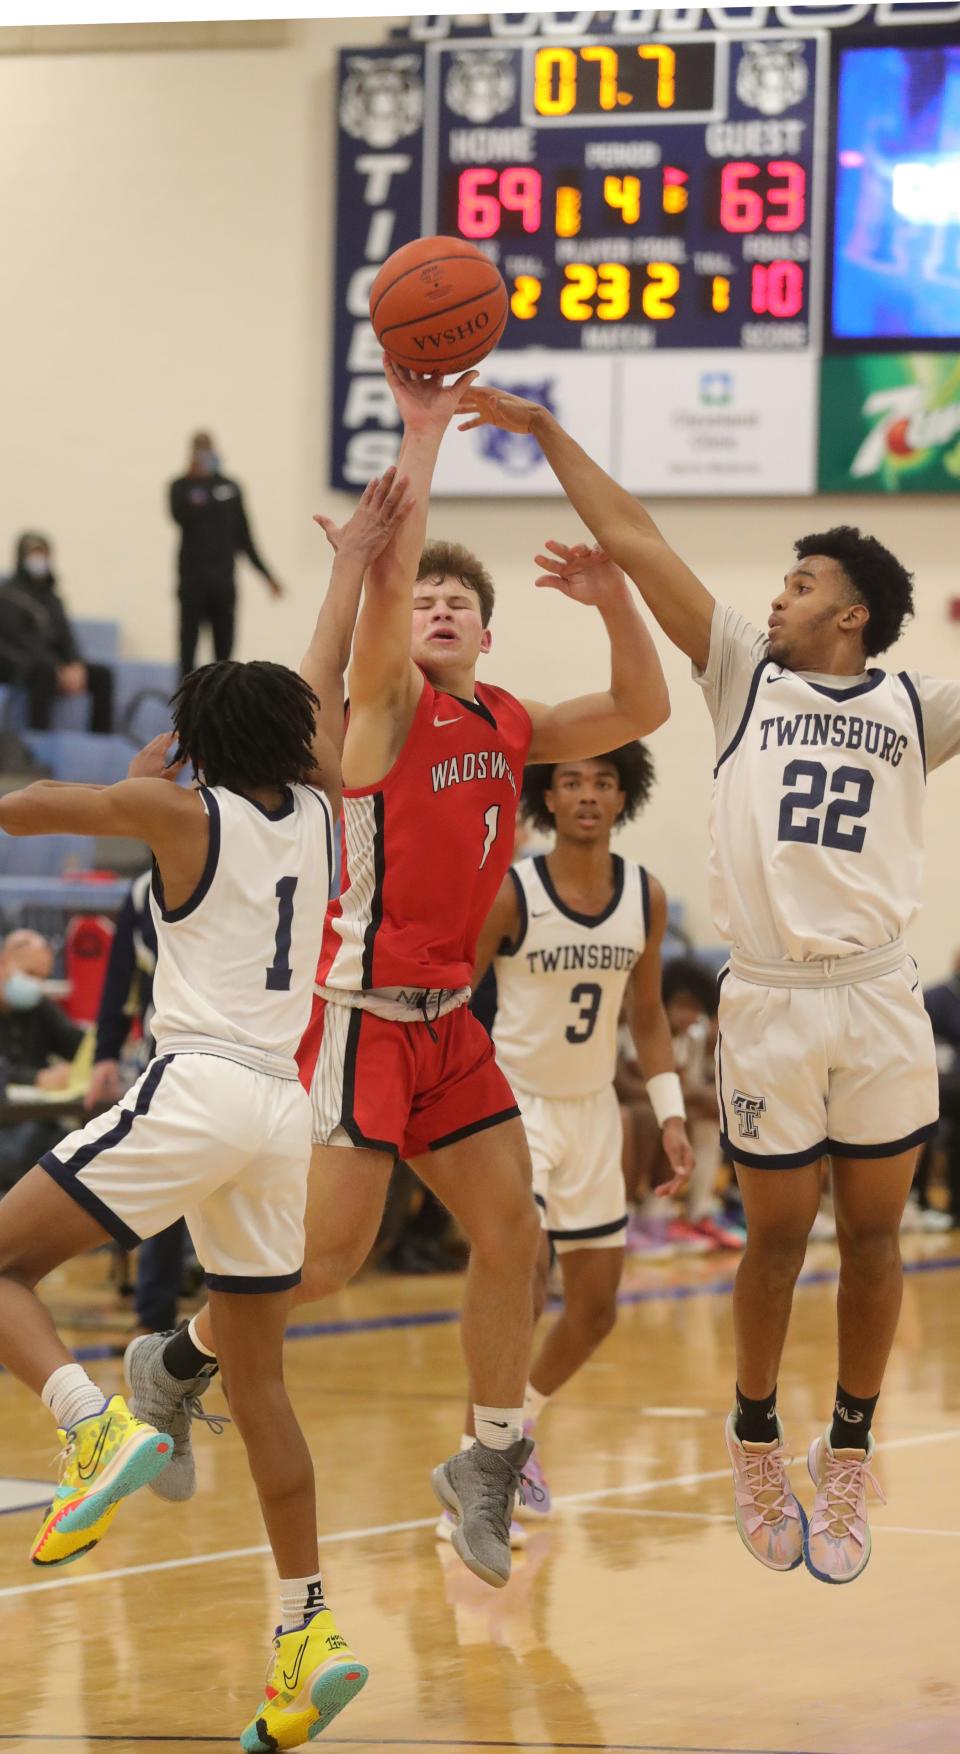 Wadsworth's Maxx Bosley sinks a 3-pointer with seven seconds remaining in the game as Twinsburg's Jayden Patton, left, and Adam Williams defend, Friday, Jan. 14, 2022 in Twinsburg.